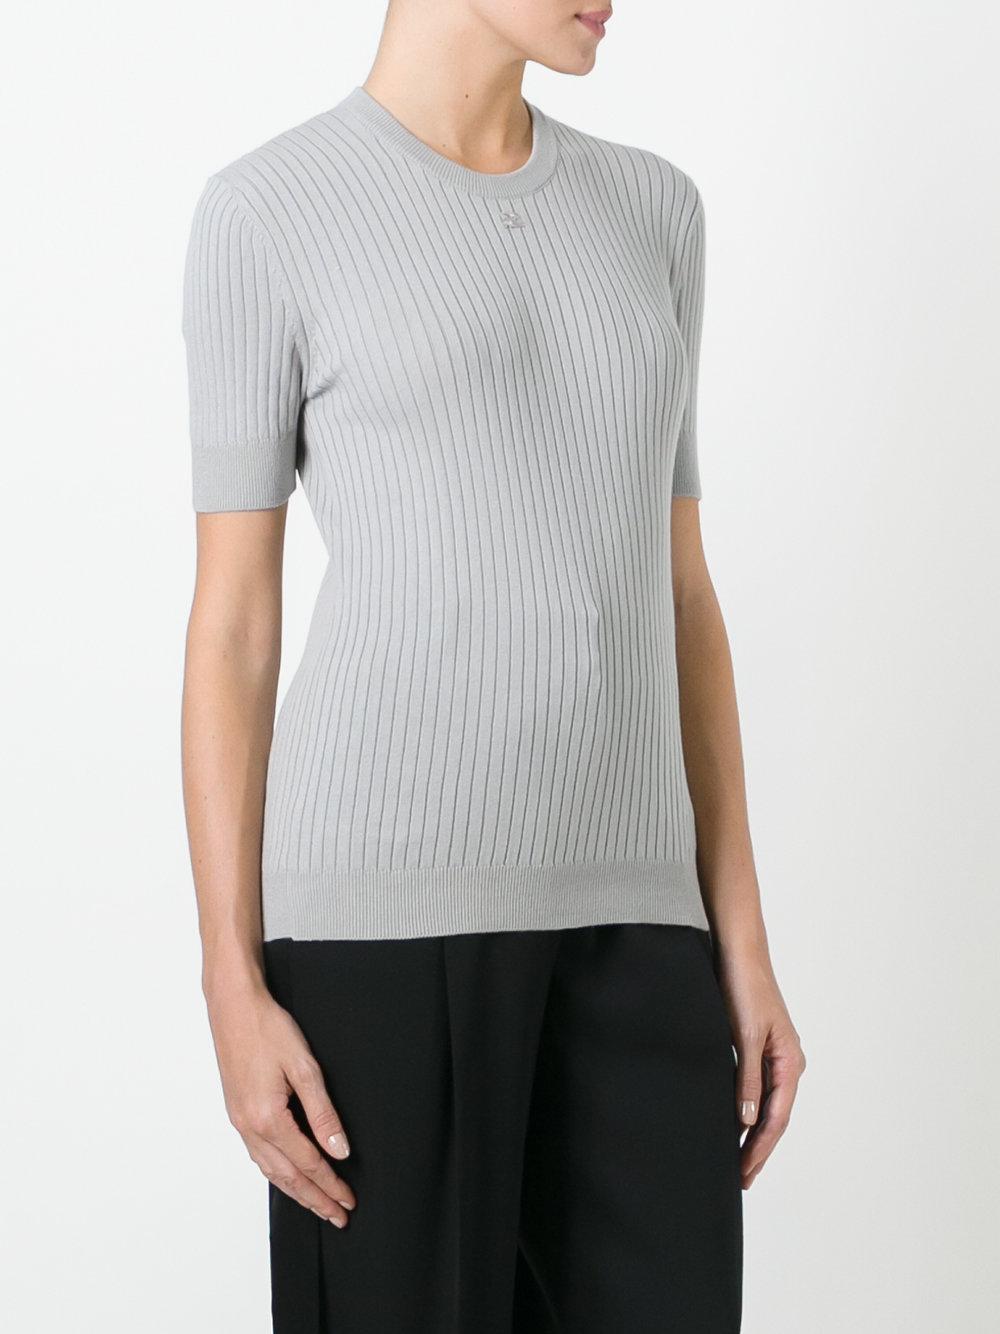 Lyst - Courreges Ribbed Knit T-shirt in Gray